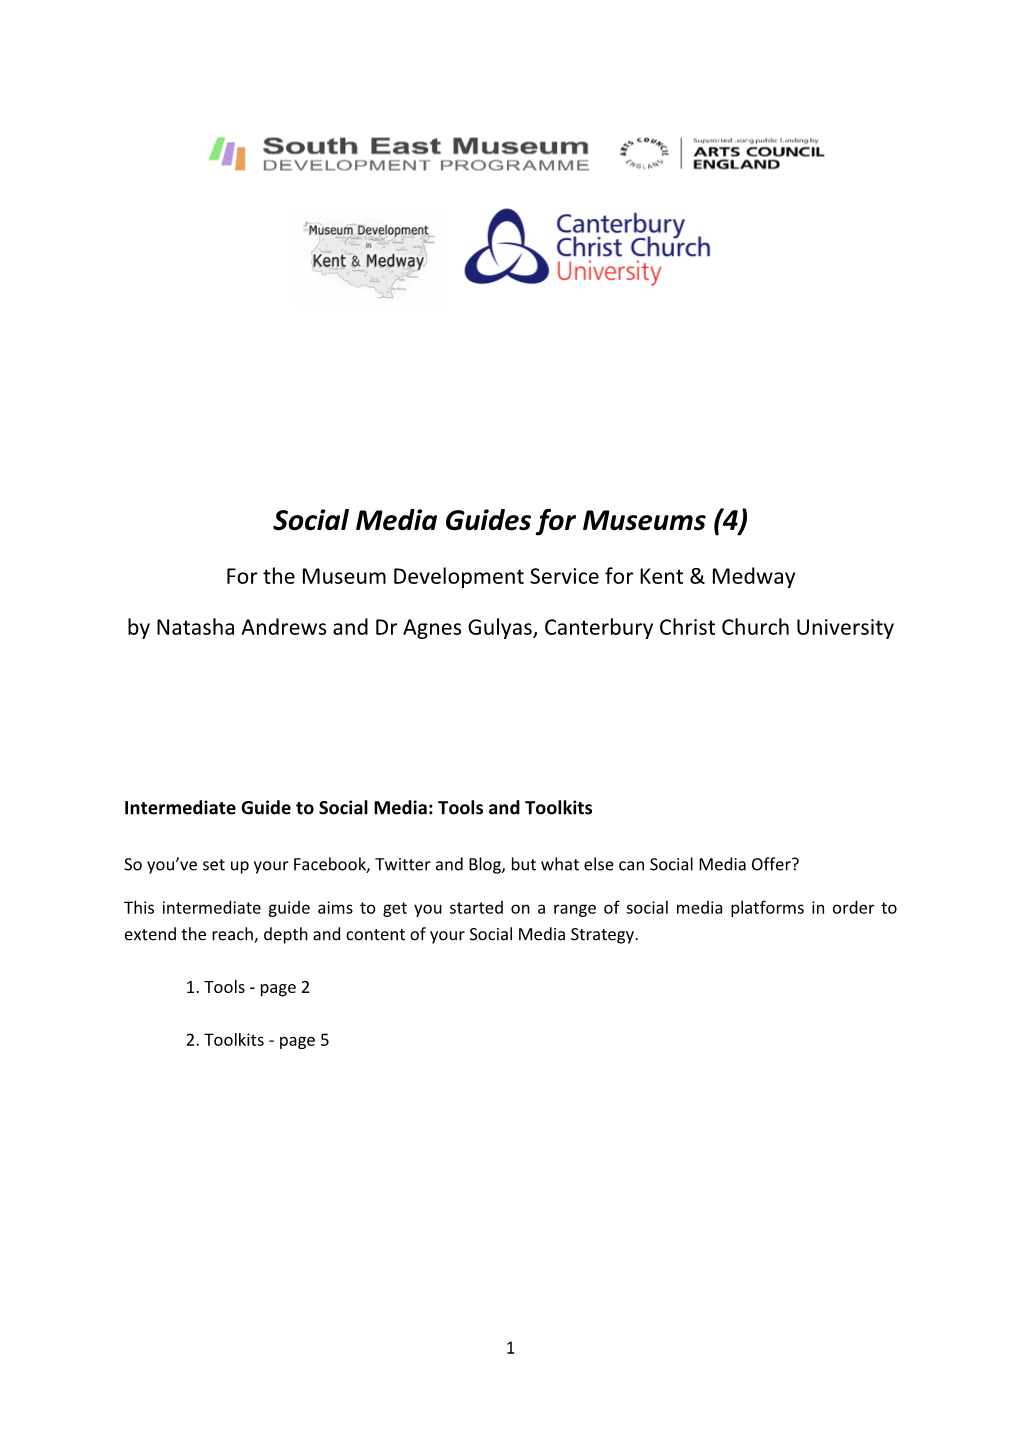 Social Media Guides for Museums (4)